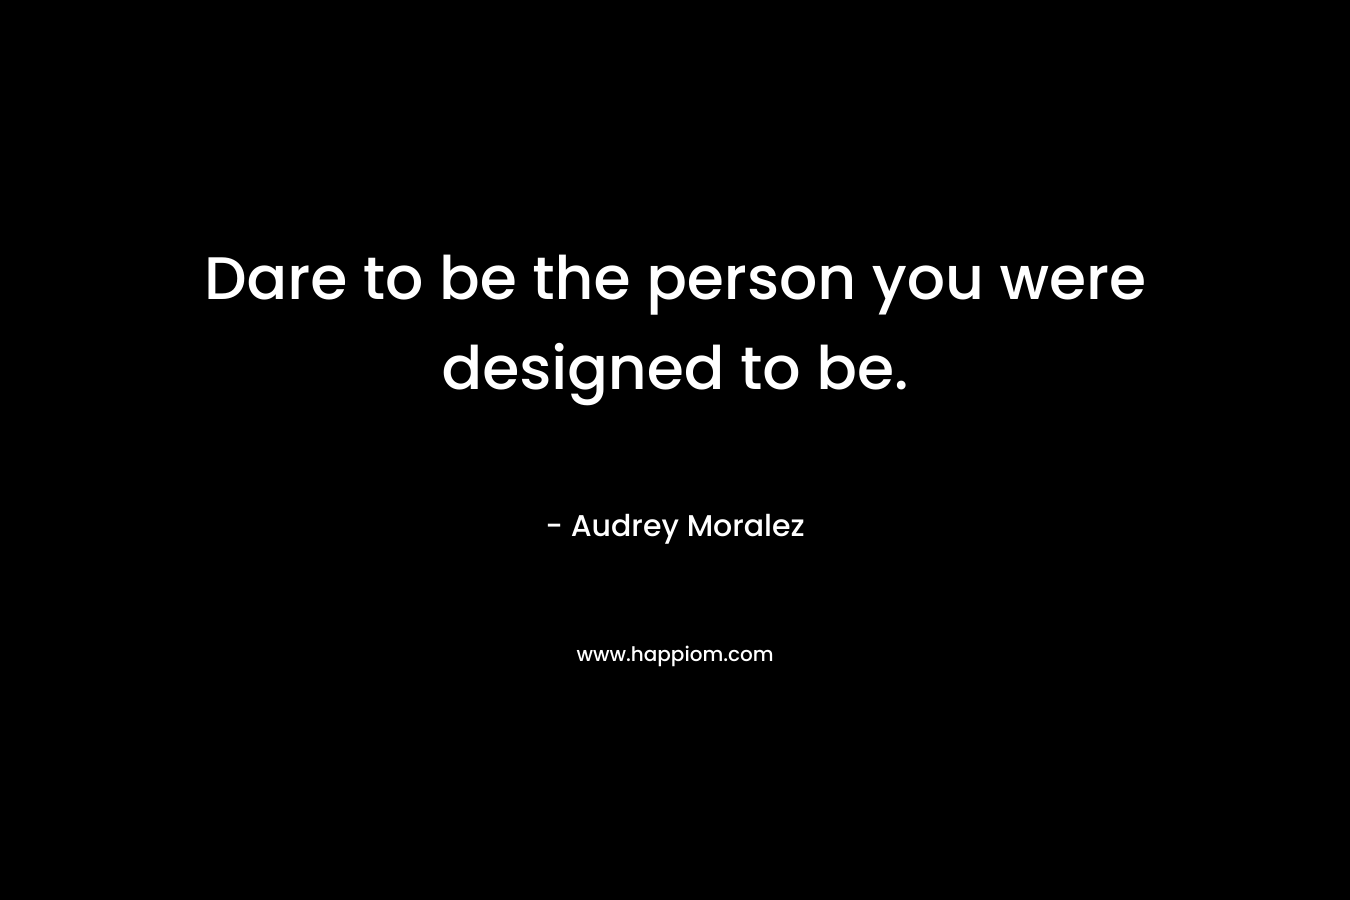 Dare to be the person you were designed to be.